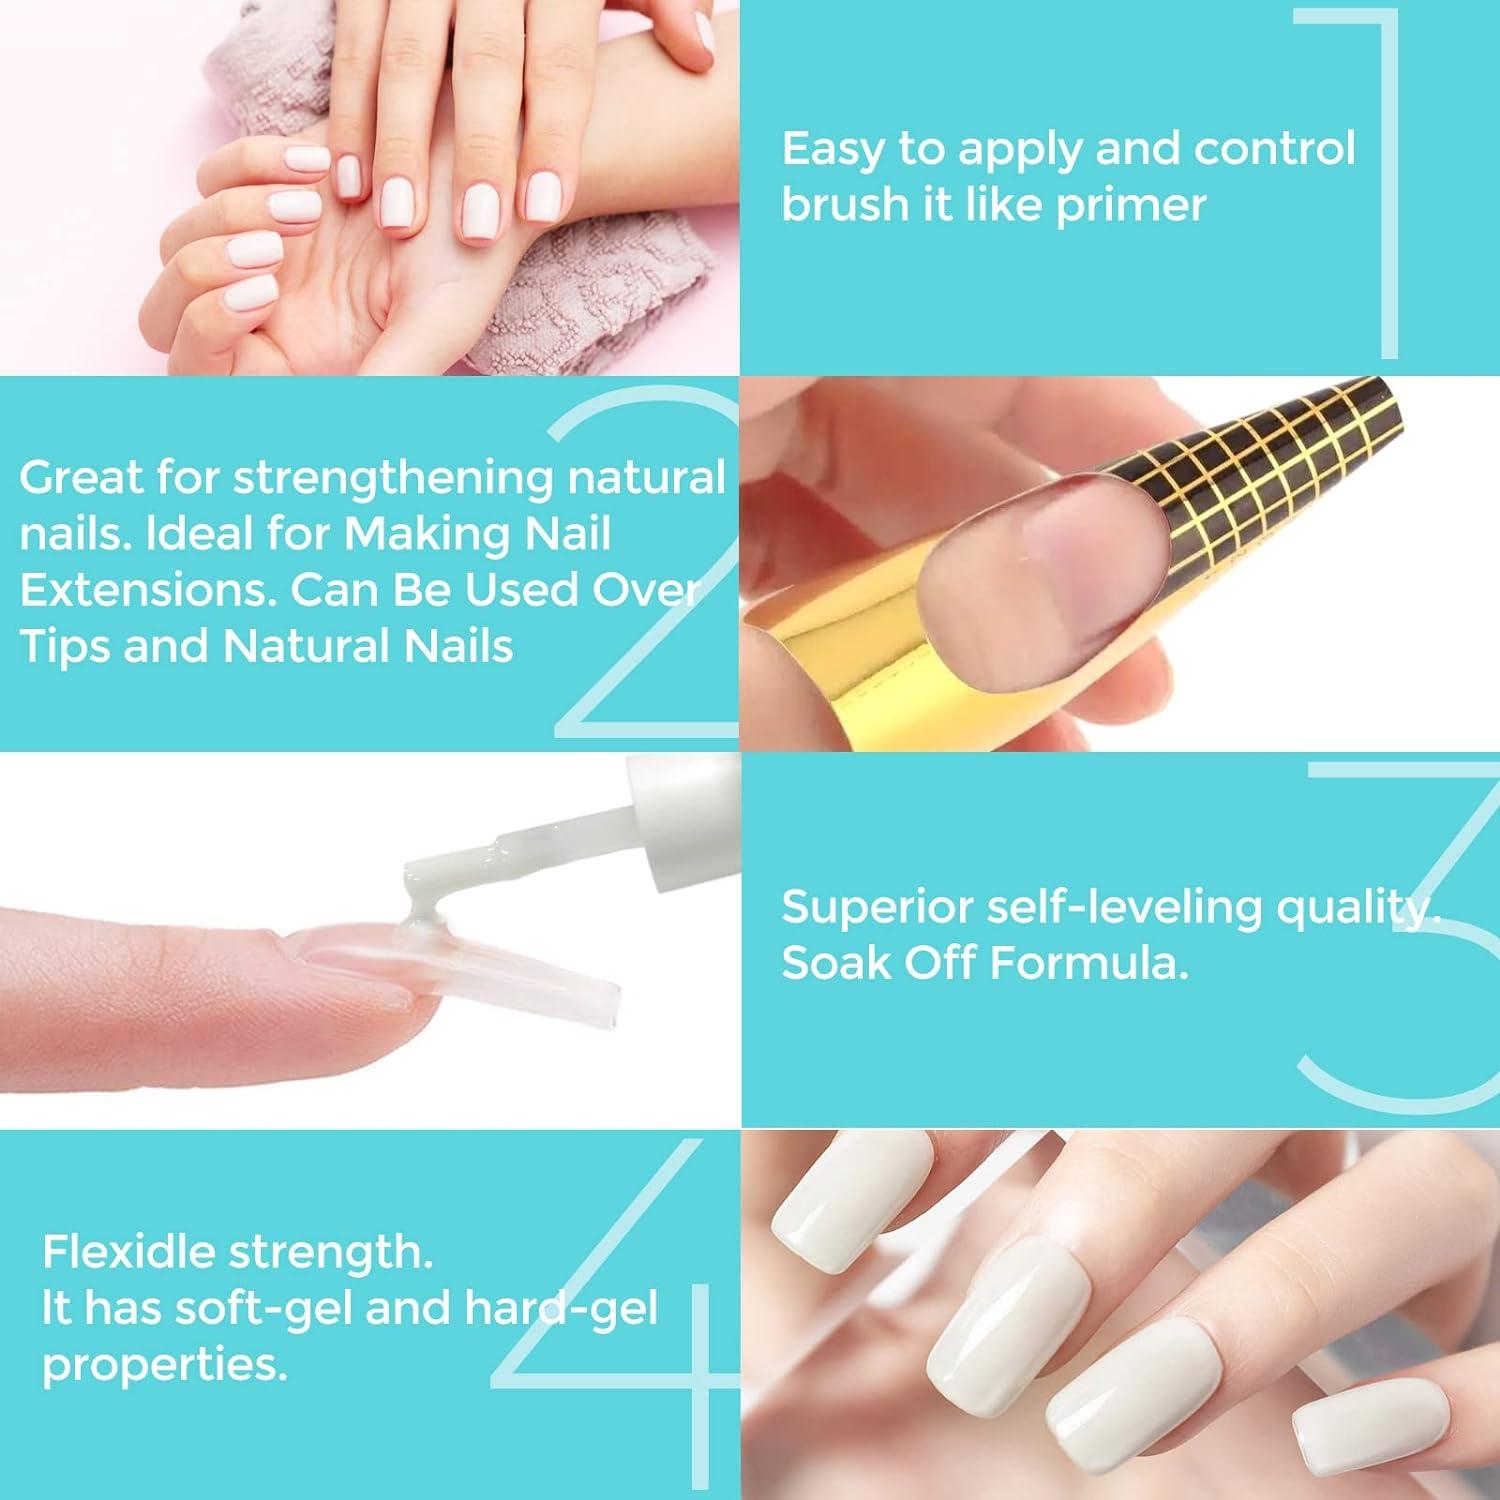 How to use builder gel on natural nails